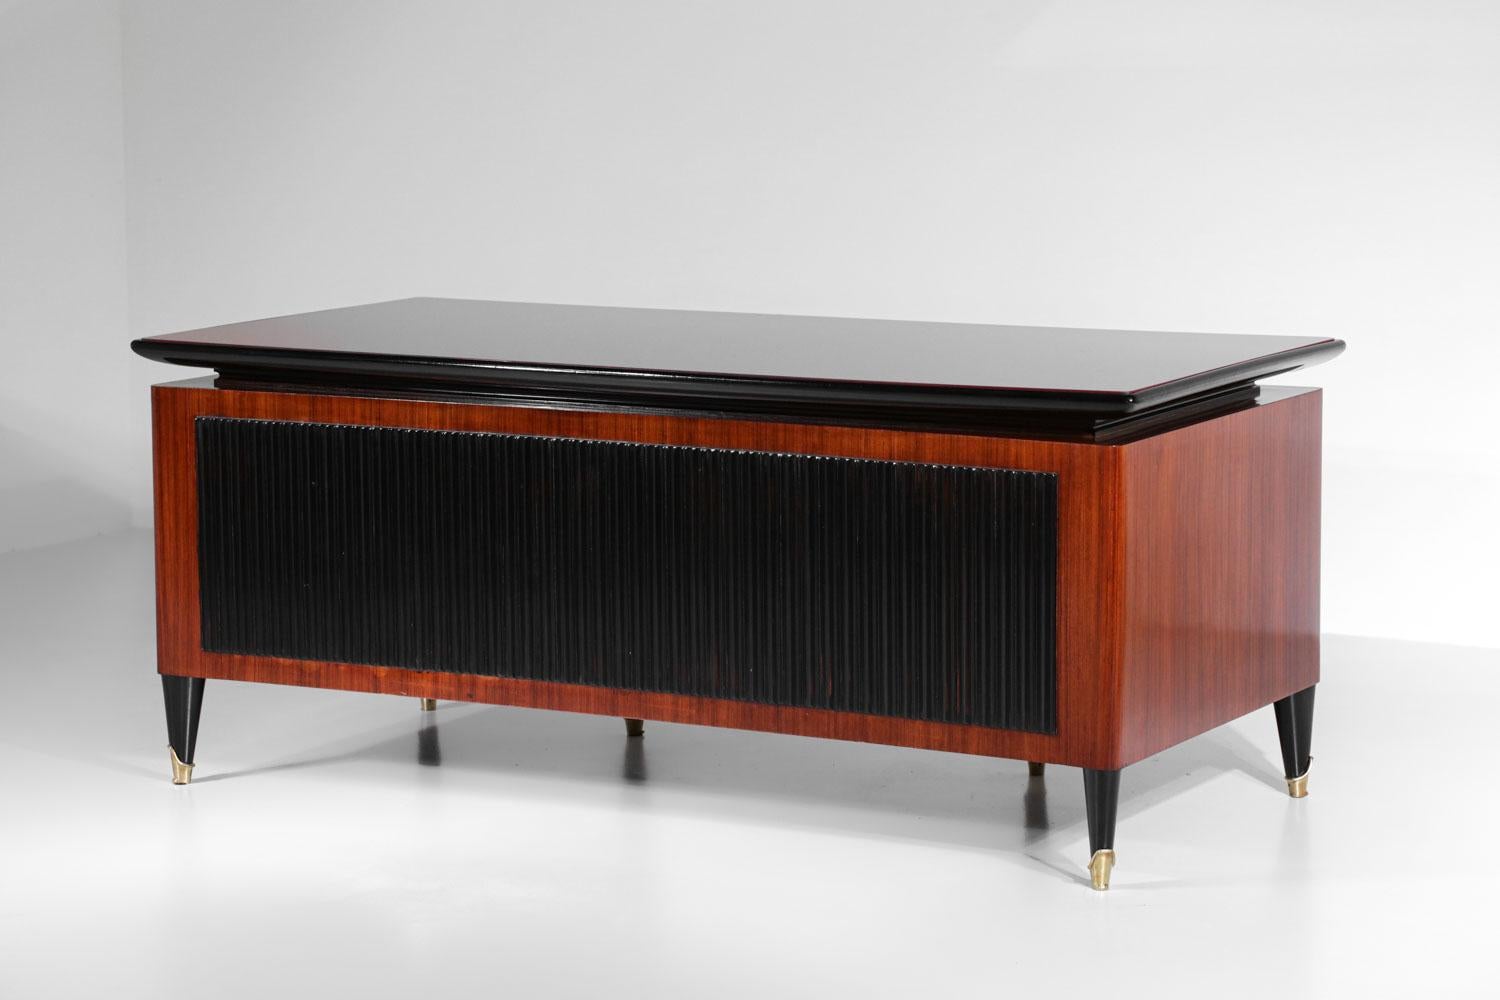 Italian large Desk by Vittorio Dassi solid wood and glass 60s - G725 For Sale 8